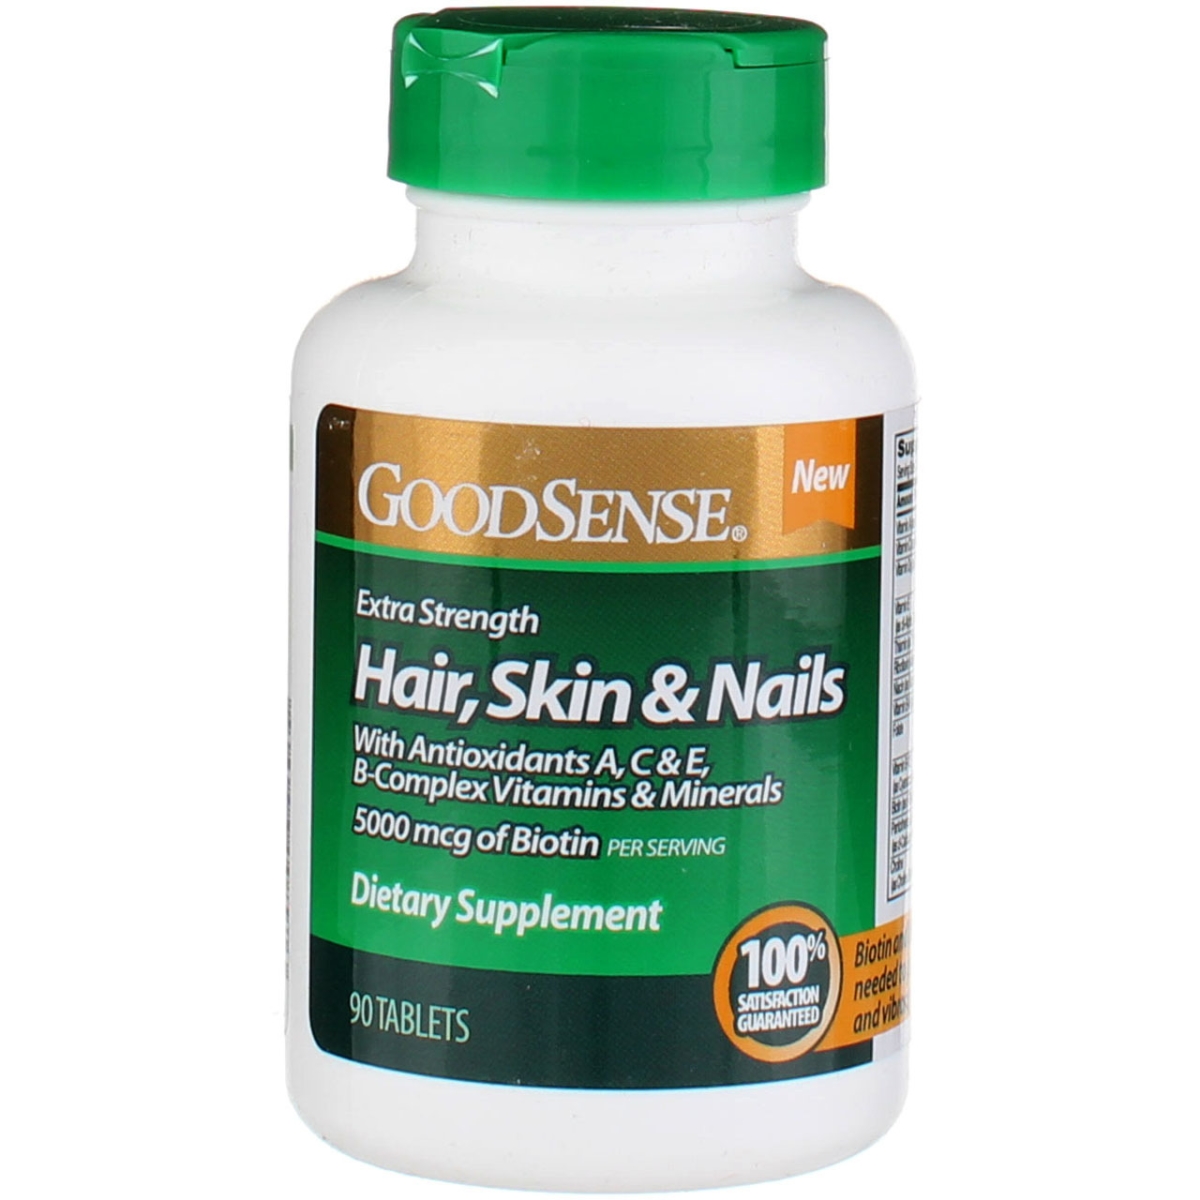 Good Sense 1902296 Hair, Skin & Nails Dietary Supplement Extra Strength Tablet, 90 Count